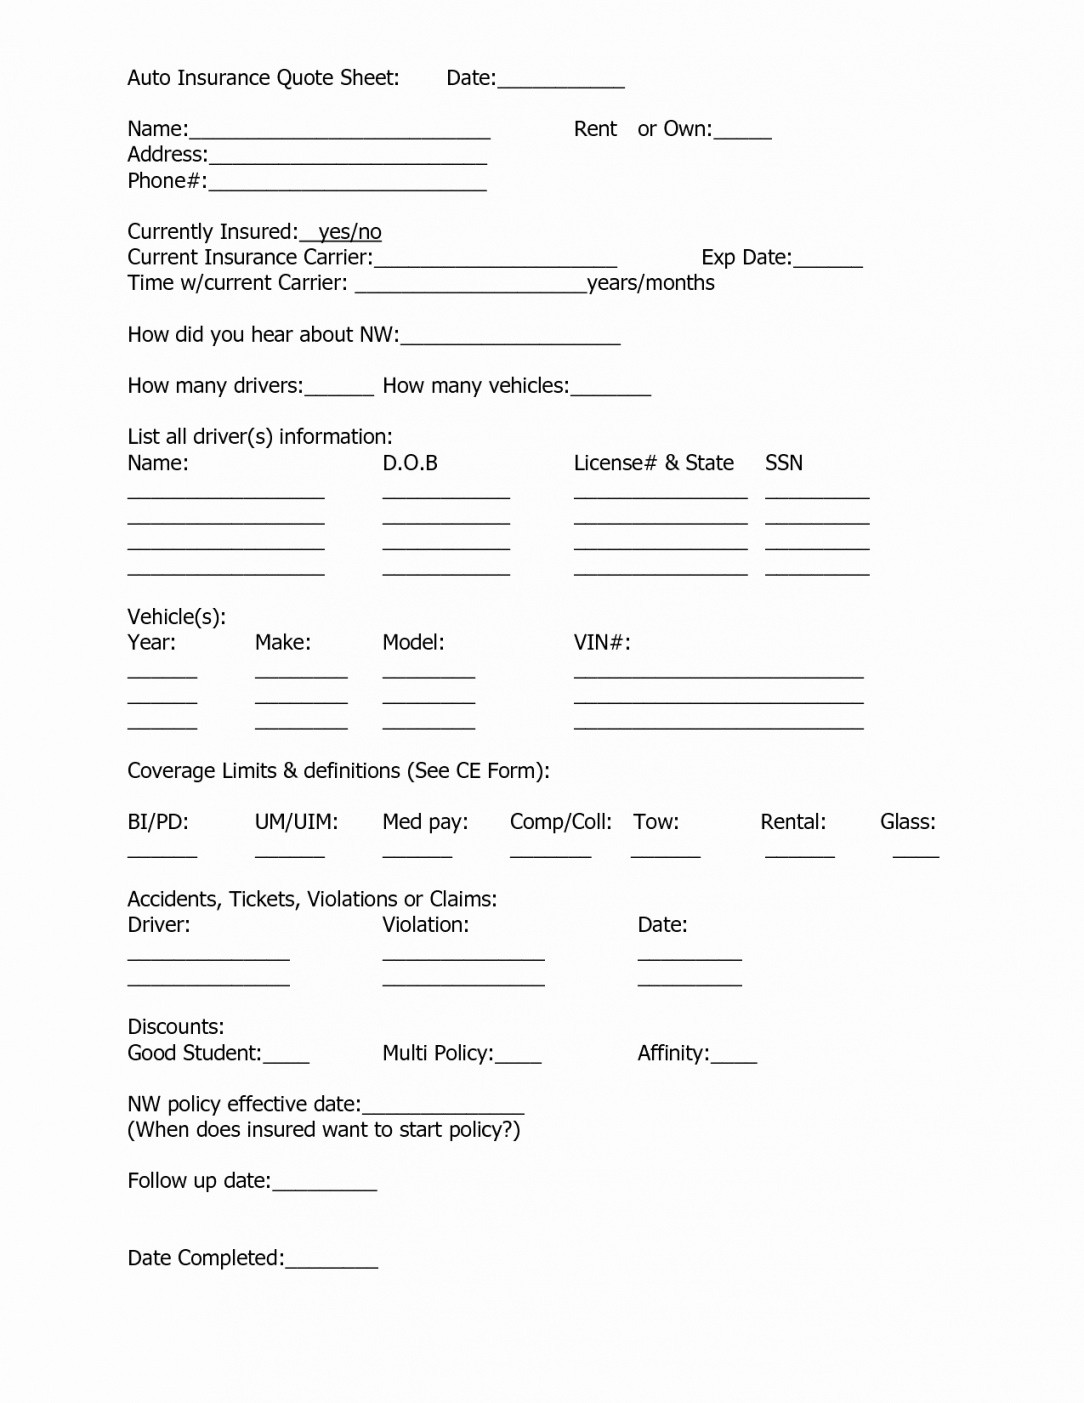 Request For Proposal Form Template Beautiful Auto Insurance Forms Document Quote